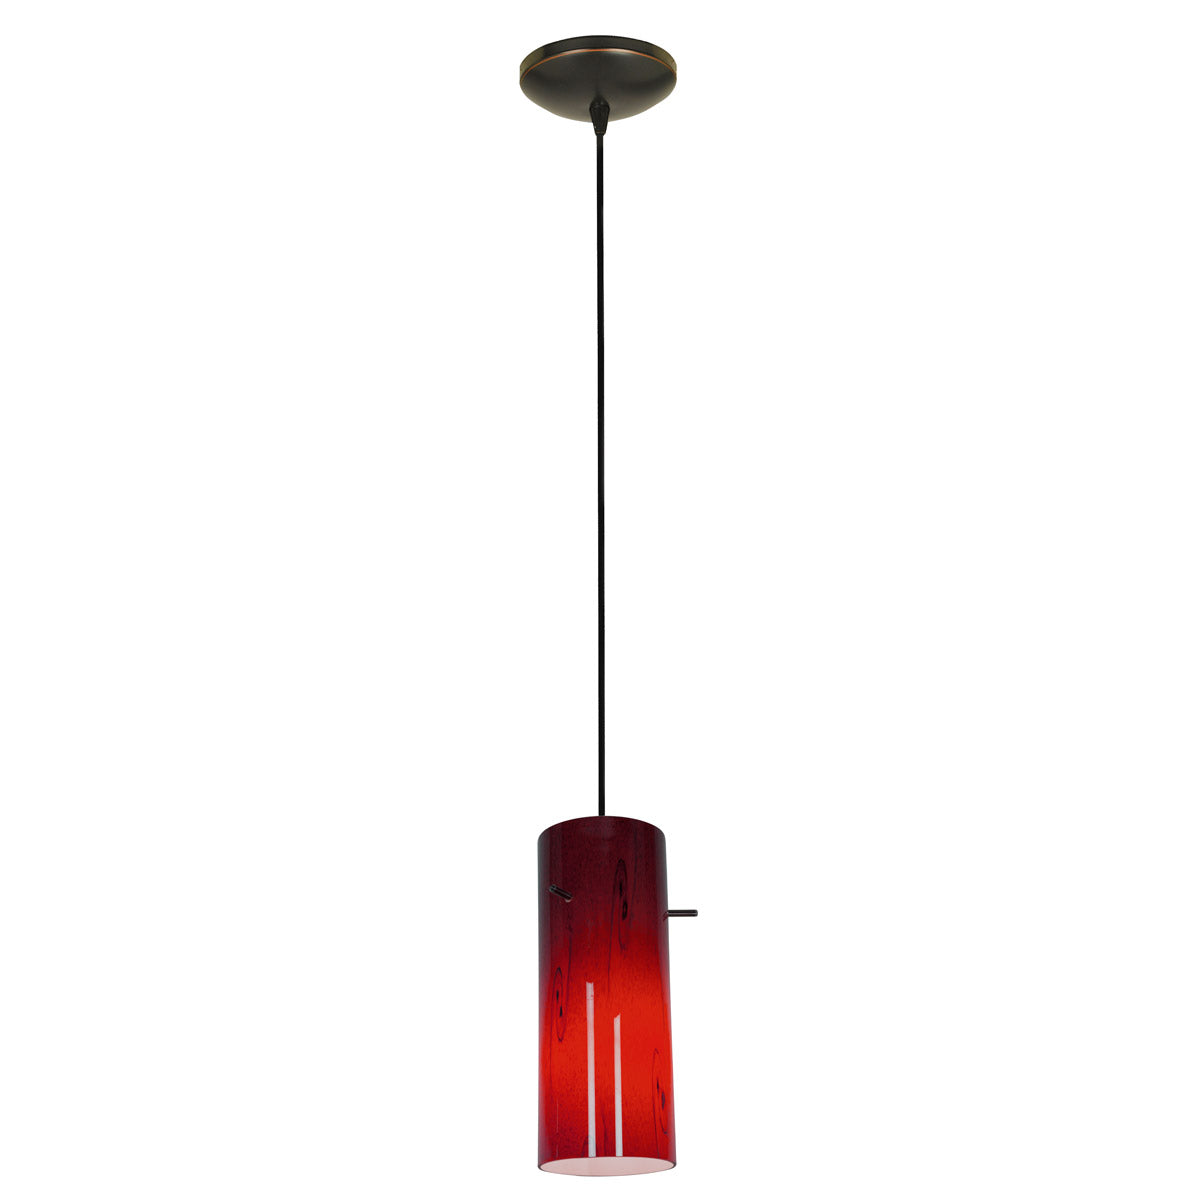 Cylinder 4 in. LED Pendant Light, Red Glass